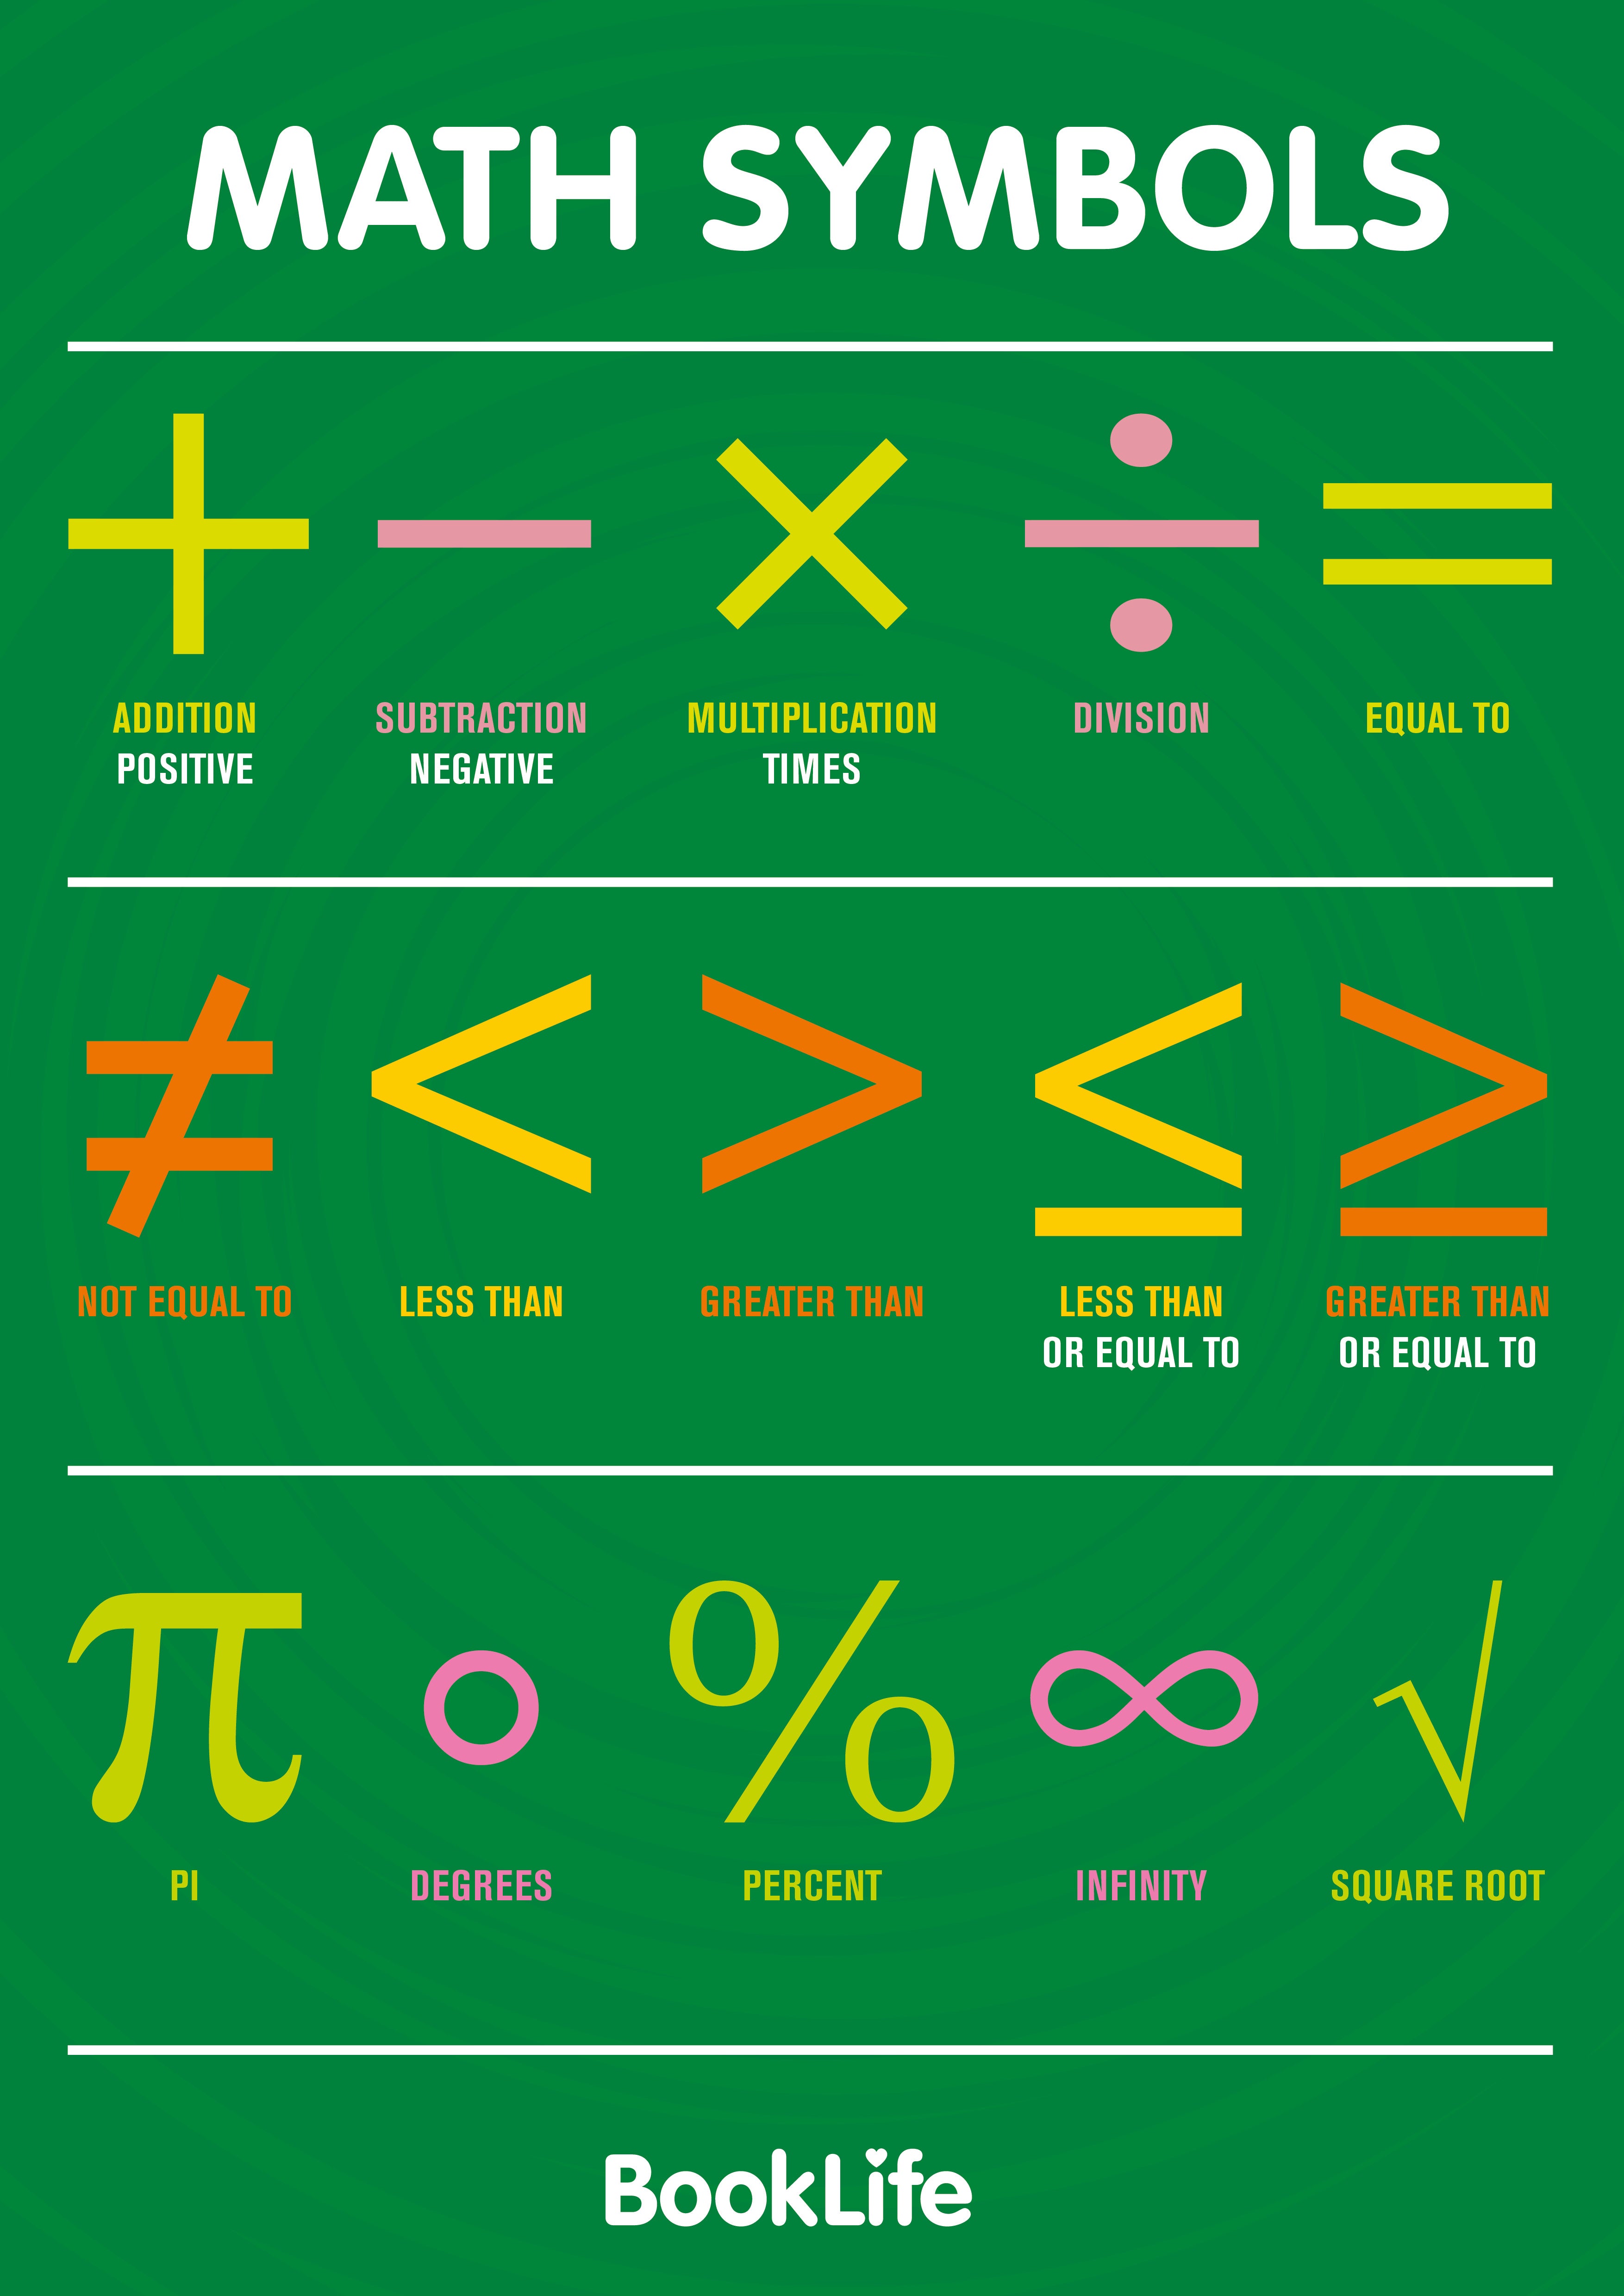 Free Math Symbols Poster by BookLife